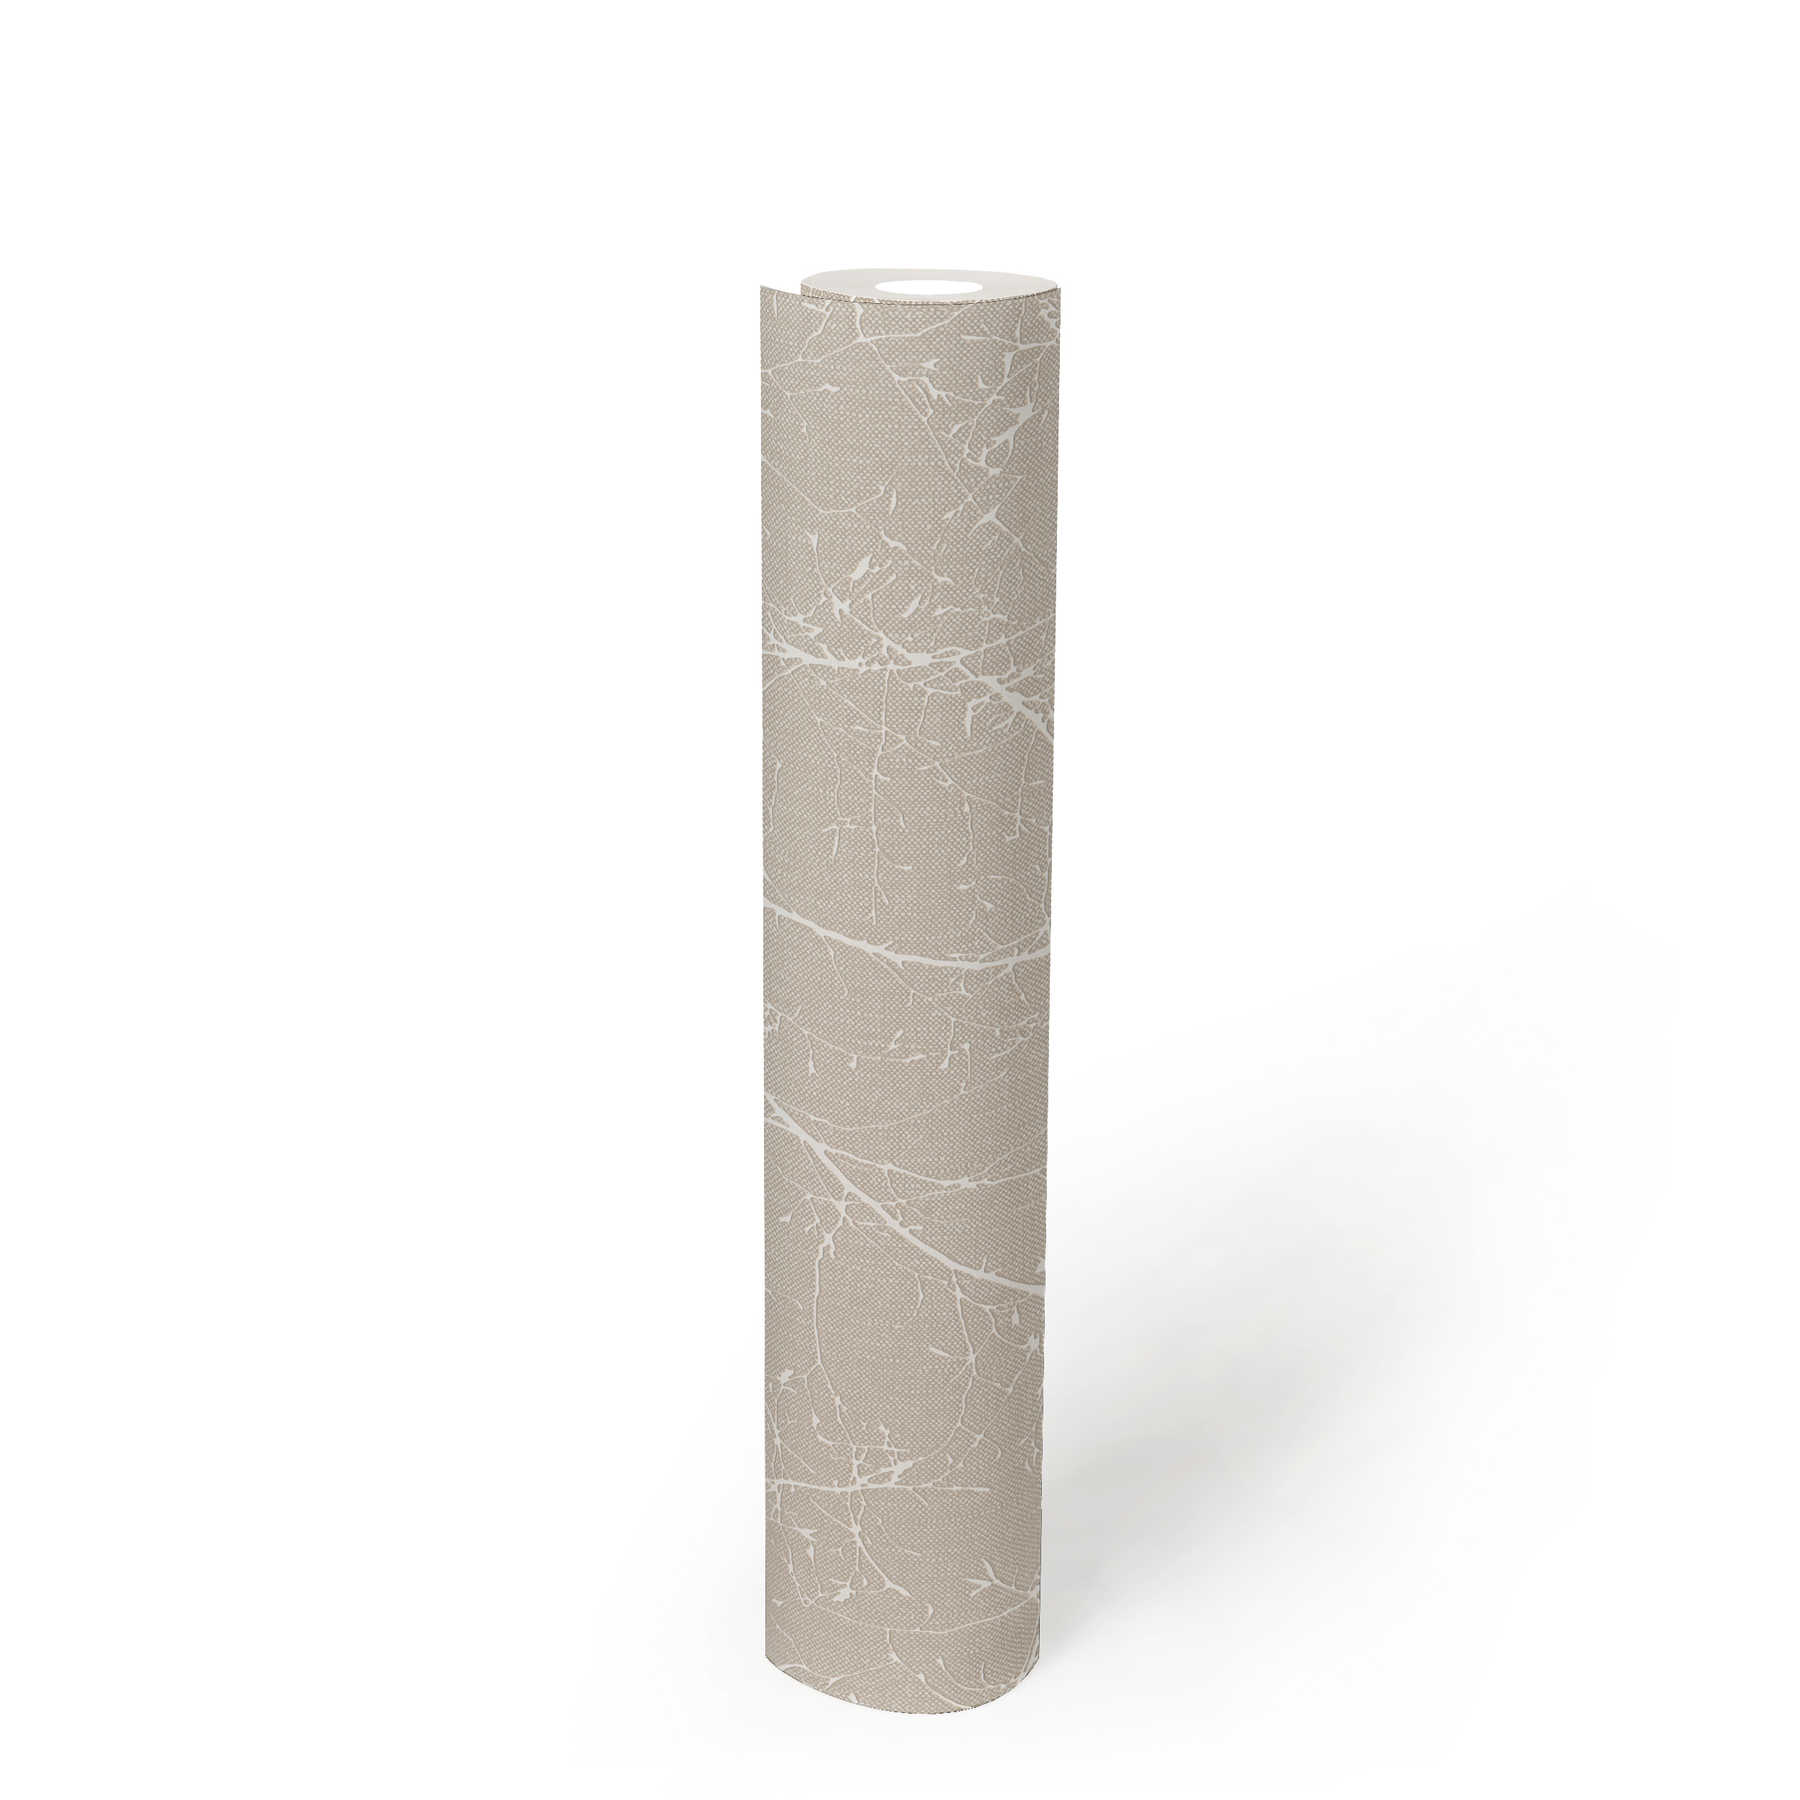             Non-woven wallpaper with linen look flowers and branches - beige, white
        